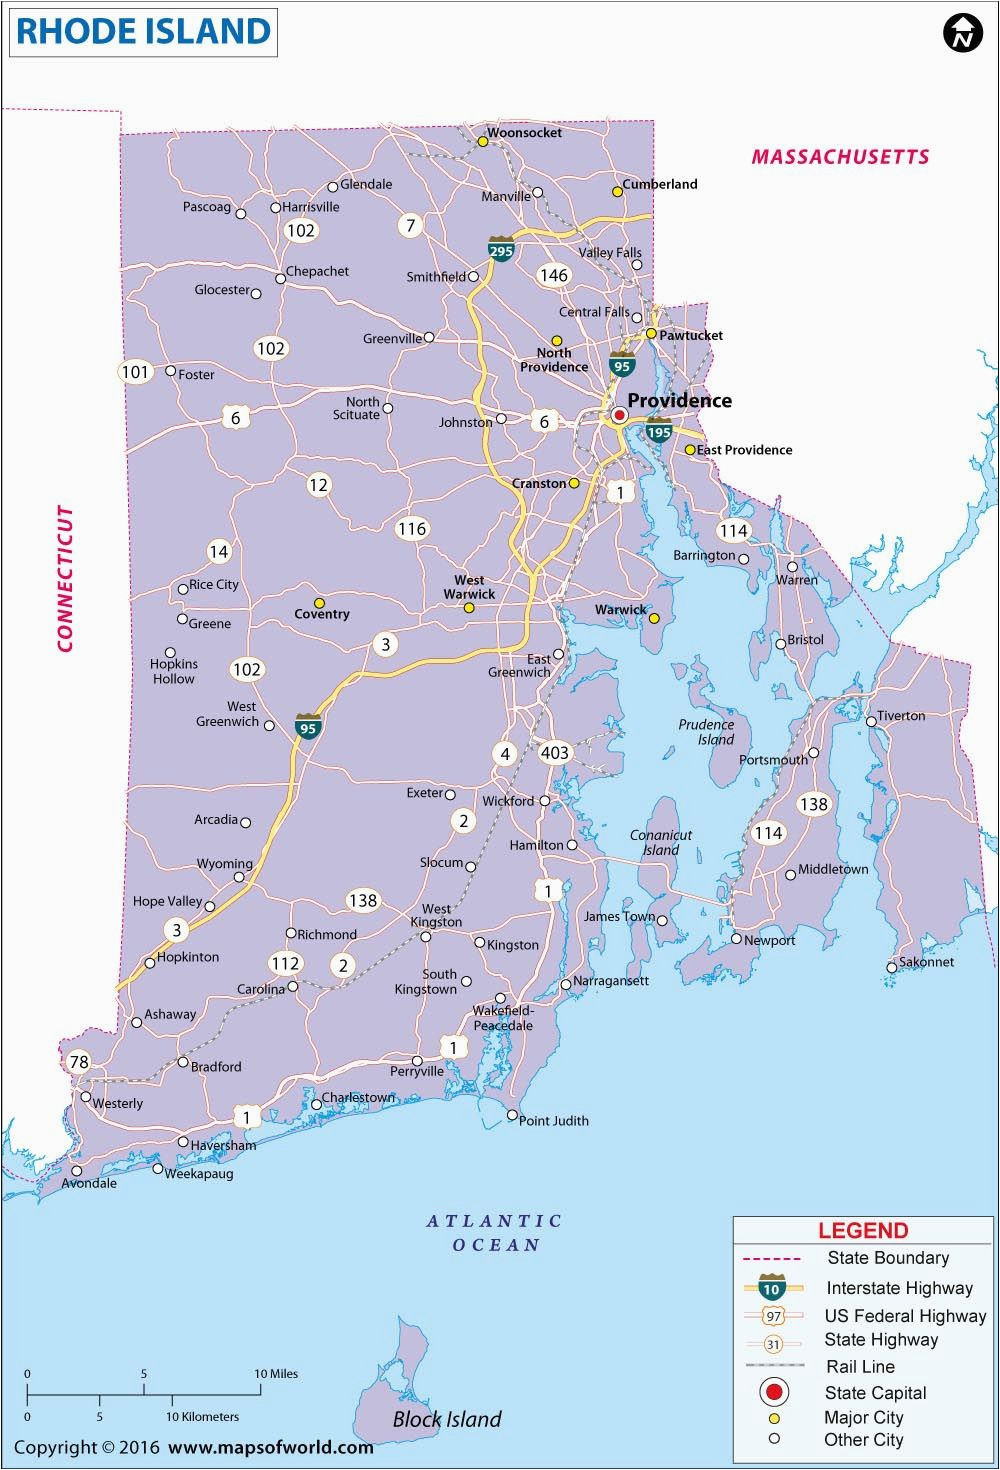 image result for rhode island fifty states rhode island